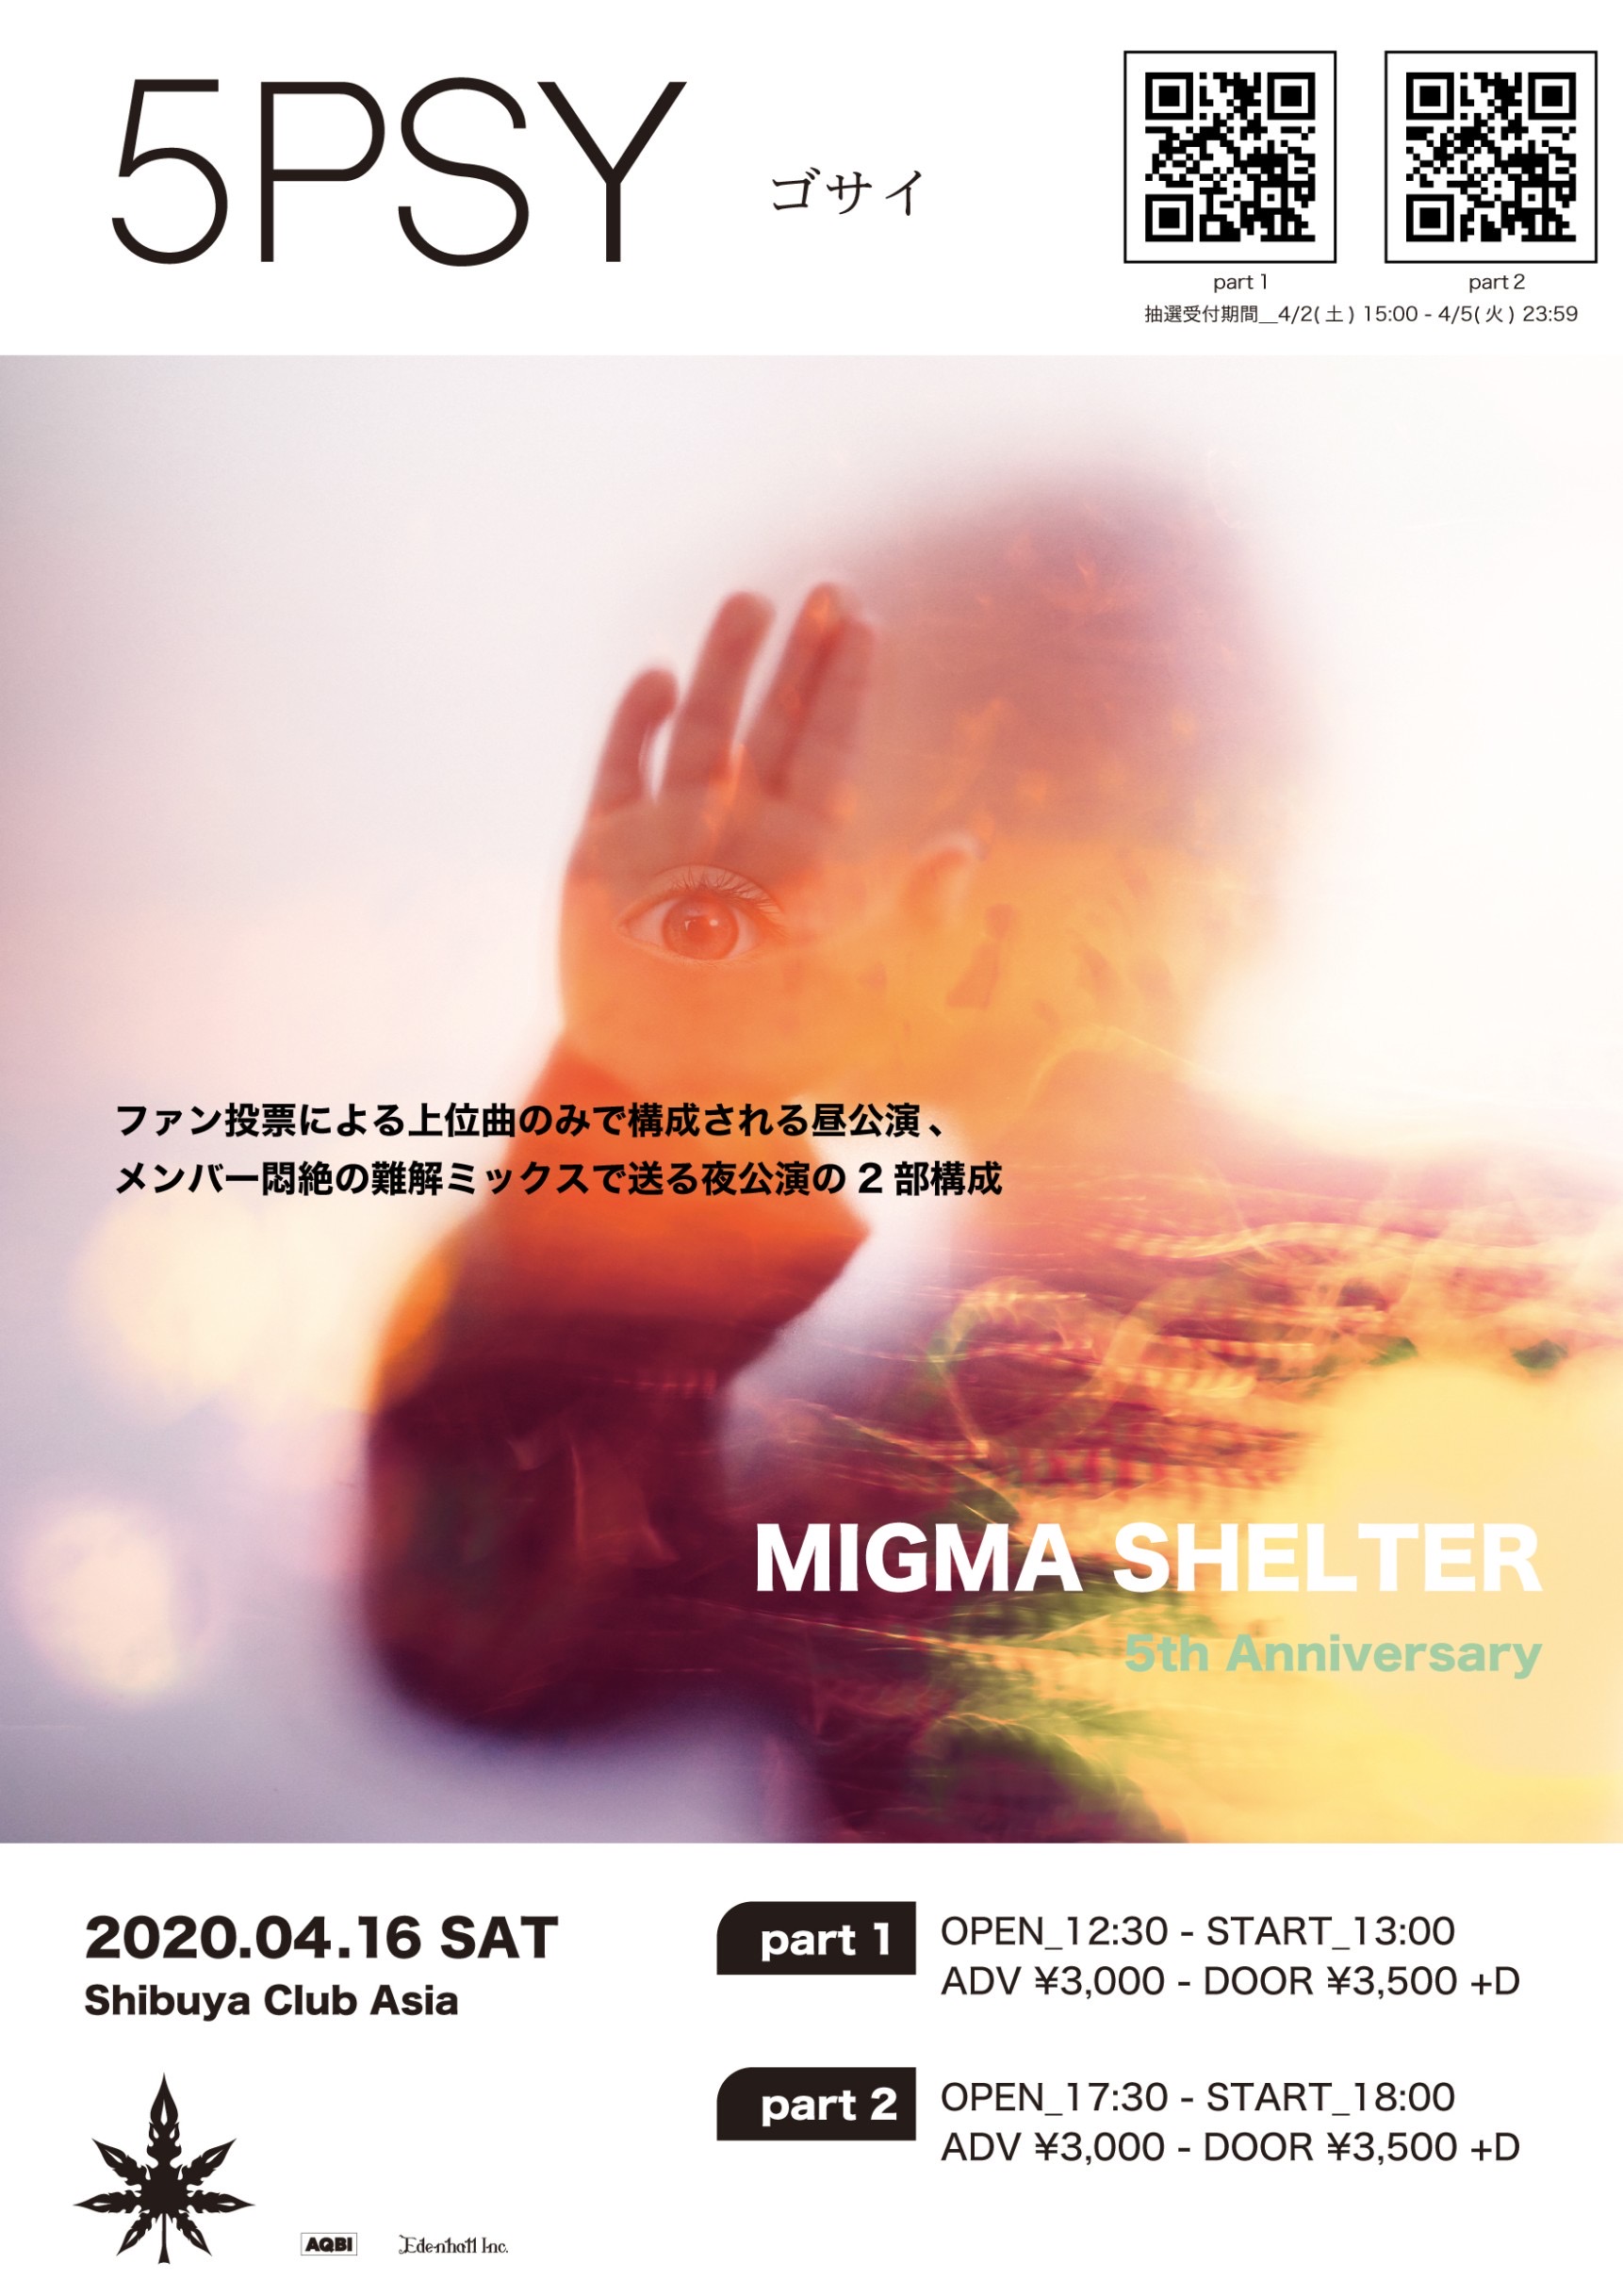 MIGMA SHELTER・周年RAVE「5PSY part2」のチケット情報・予約・購入